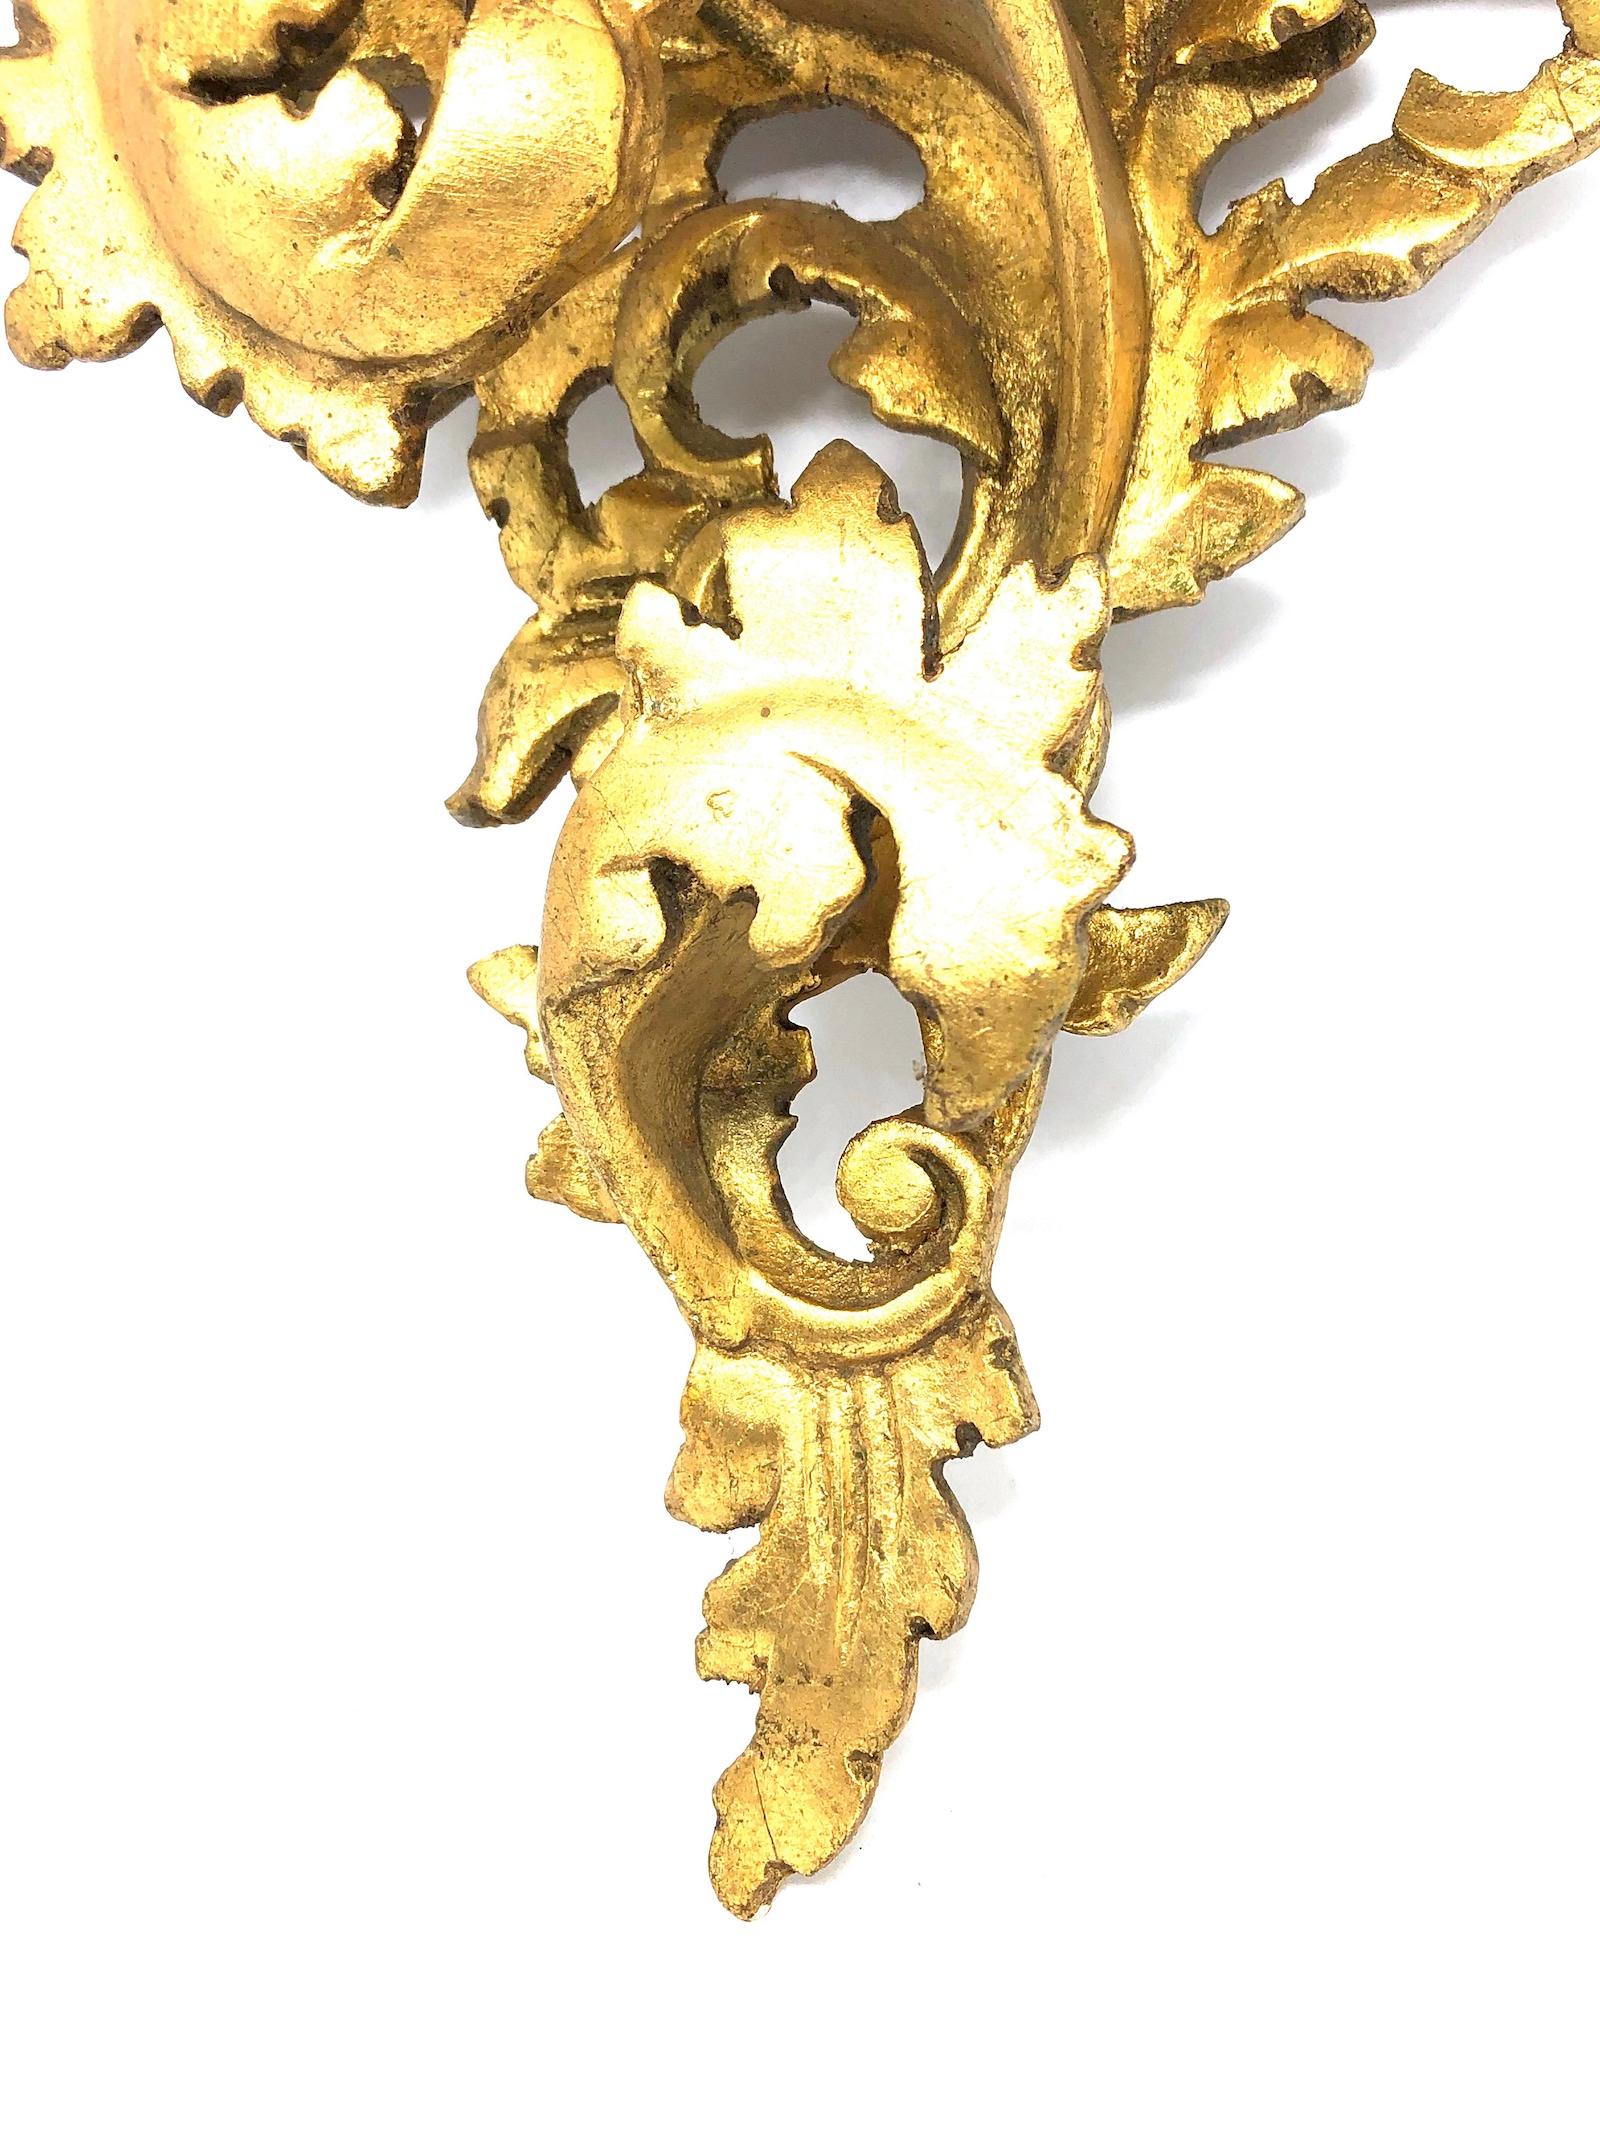 Mid-20th Century Italian Old Venetian Wall Shelf, Gilded Carved Acanthus, Rococo Style